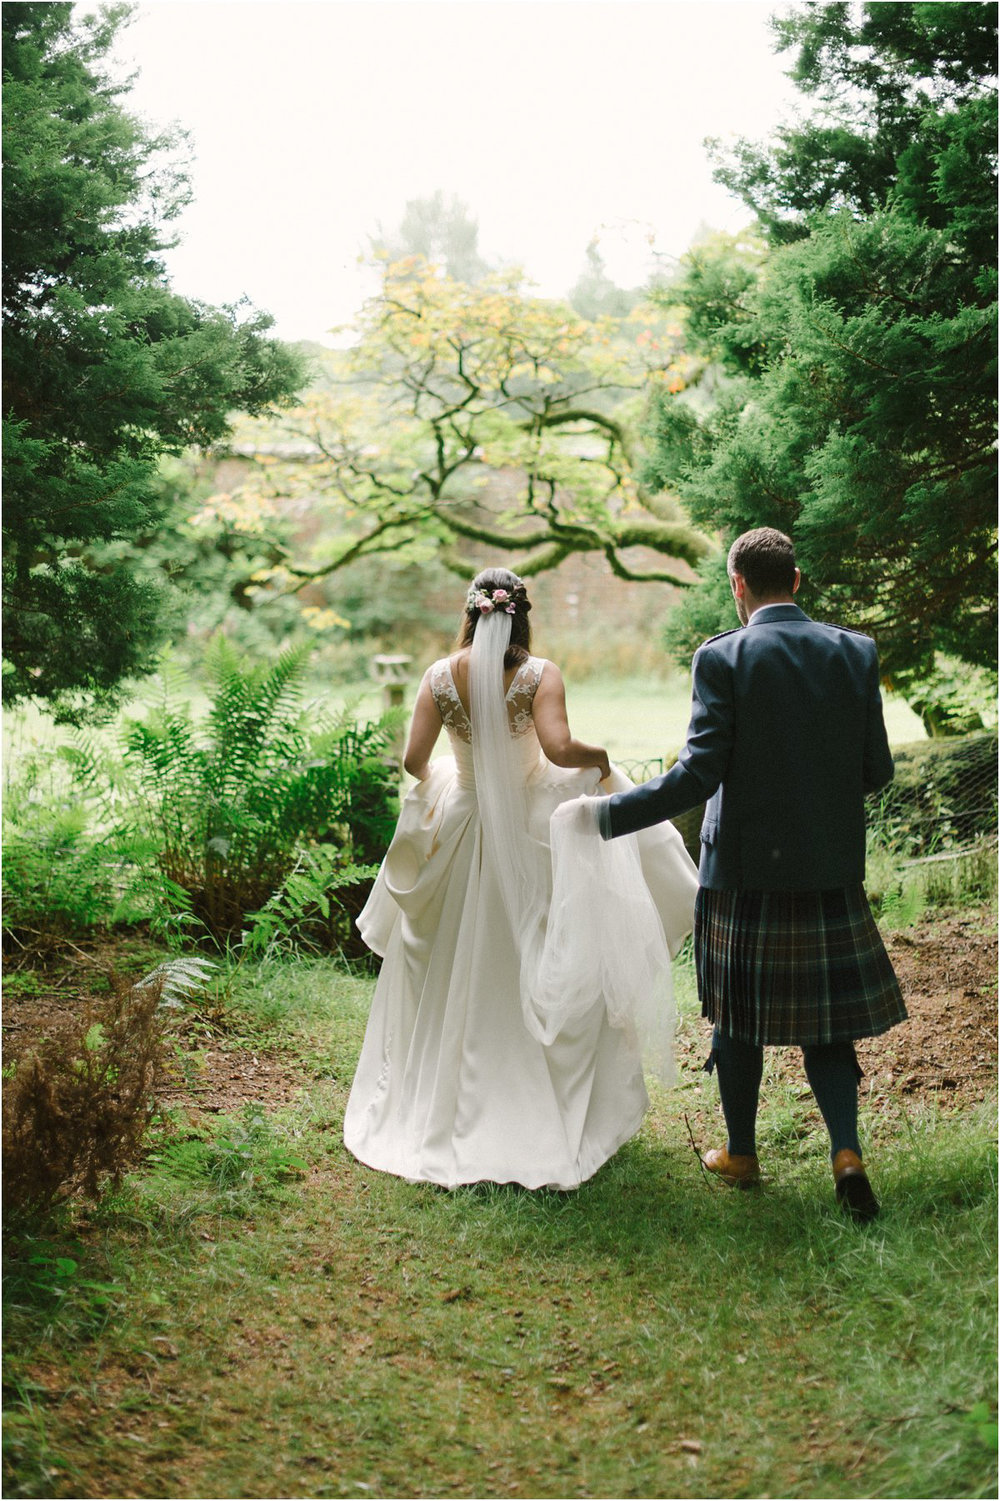  Bride and groom in kilt walking away in a forrest near Blairquhan castle in Scotland by Cro & Kow 